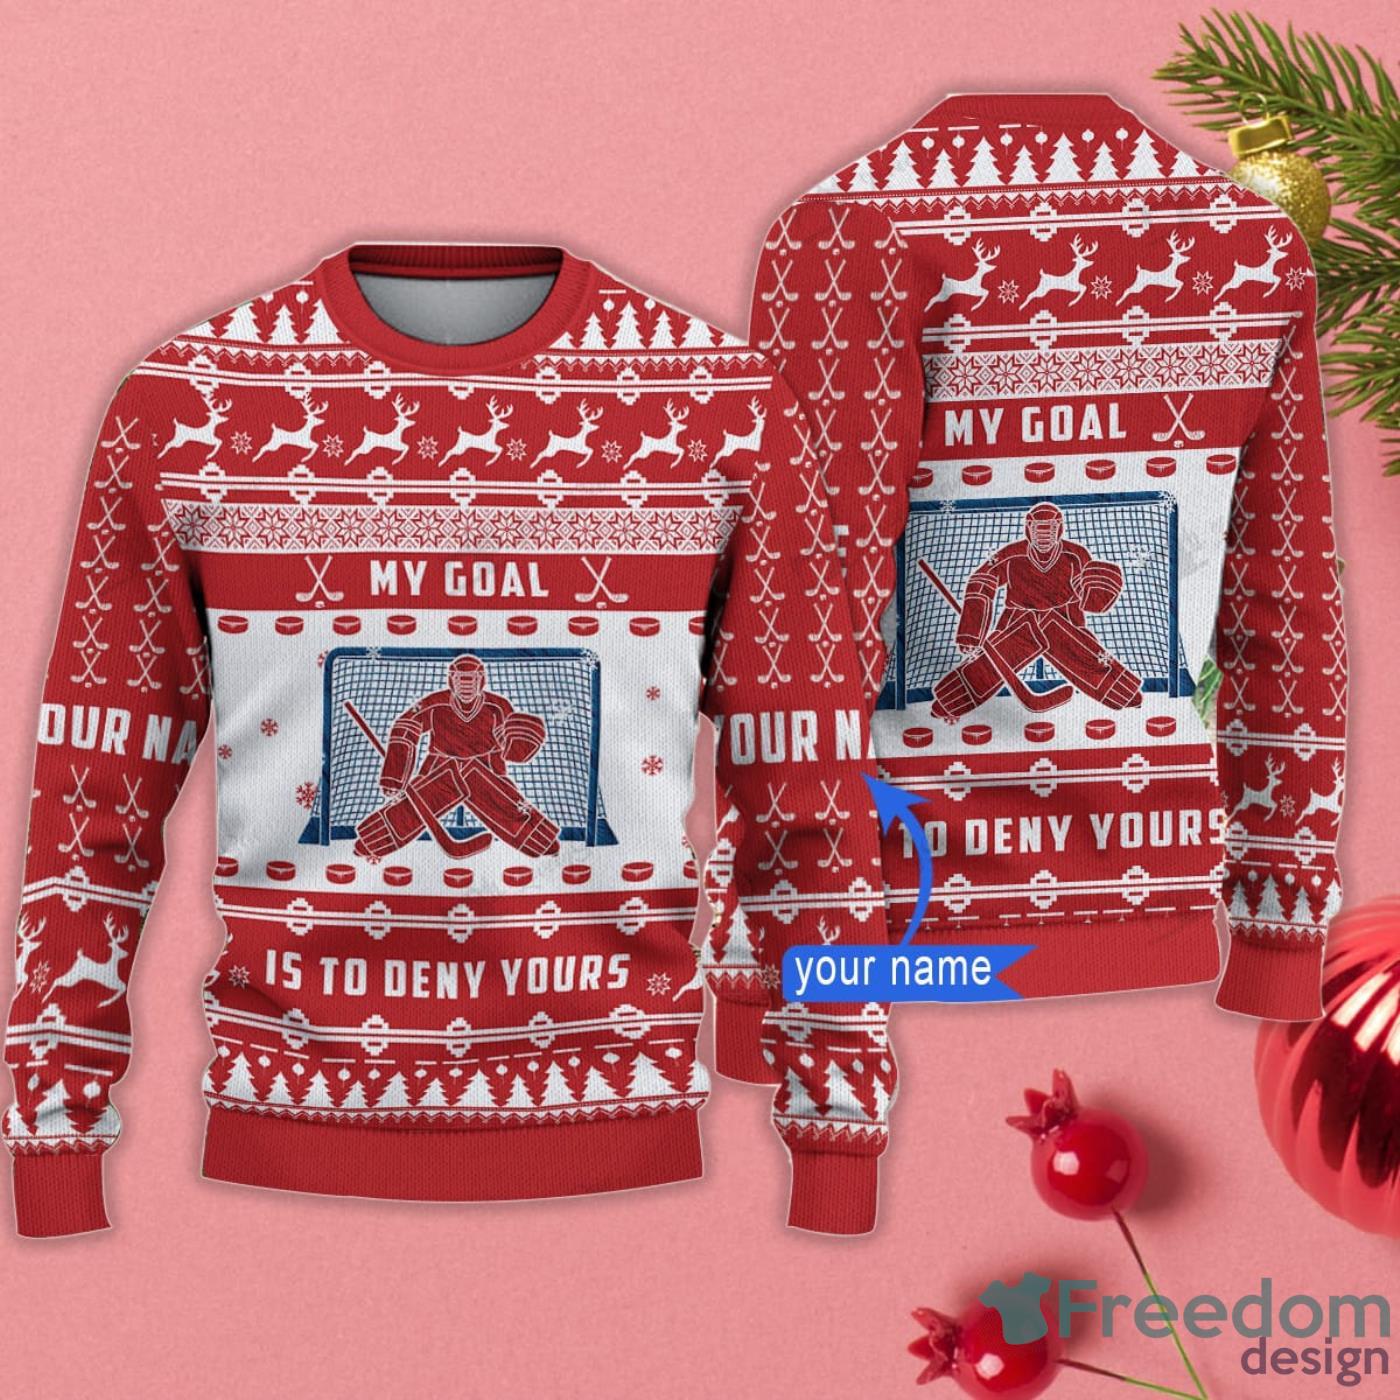 NHL - Which player had the best Christmas sweater (or